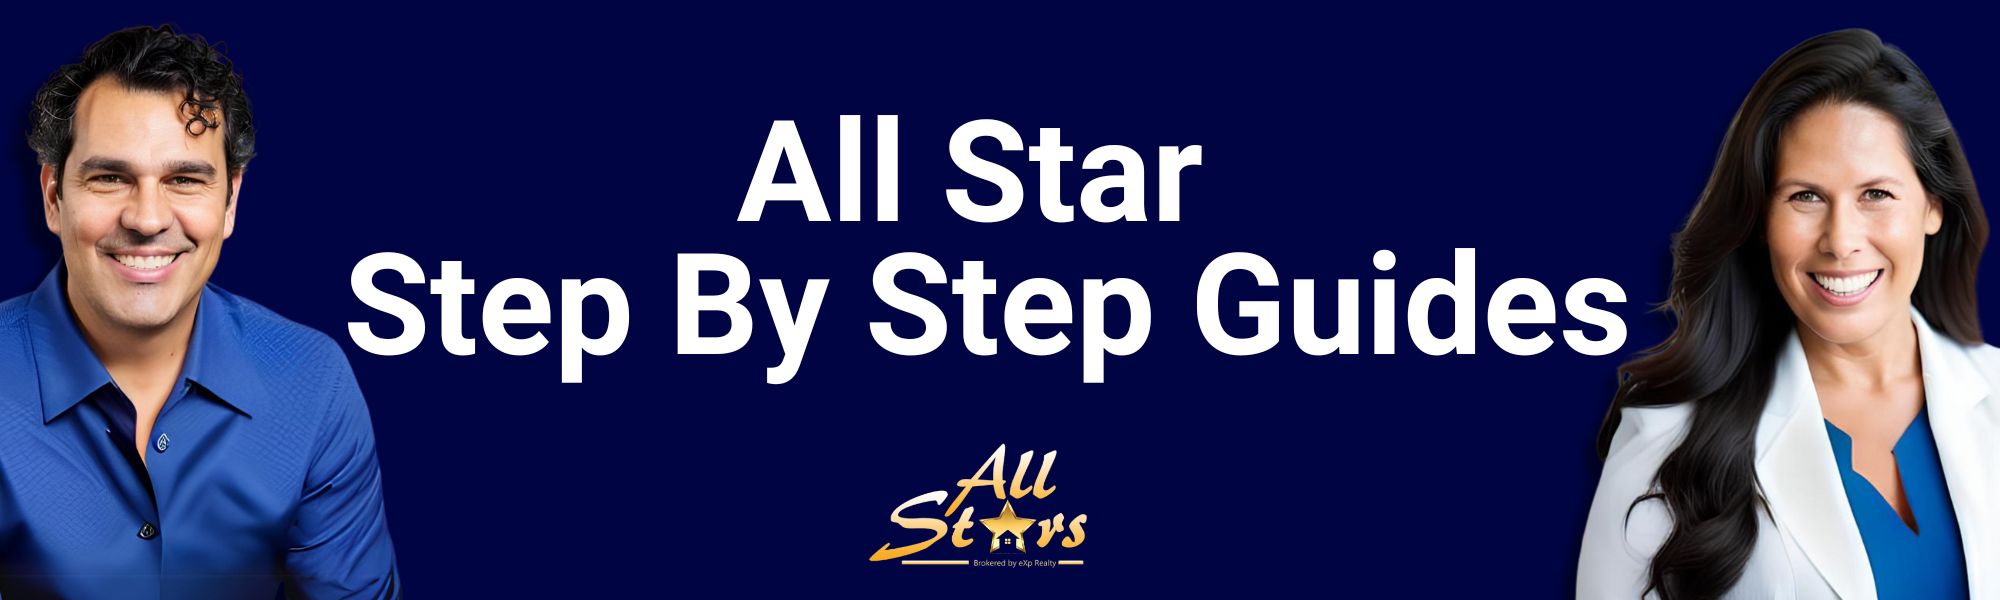 All Star Step By Step Guides